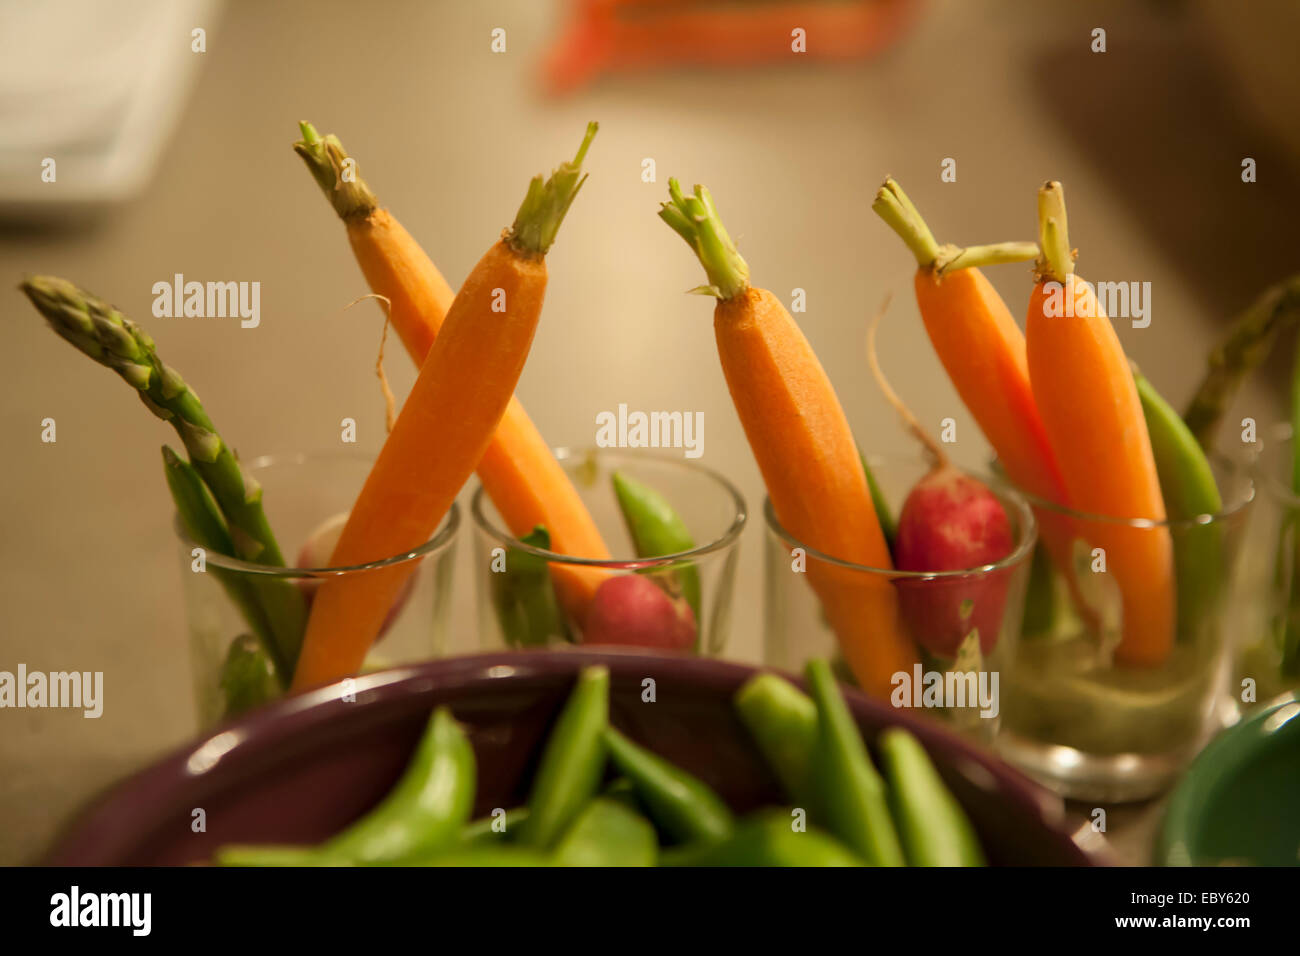 A display of carrots, asparagus, radishes and sugar snap peas in snall glasses. Stock Photo